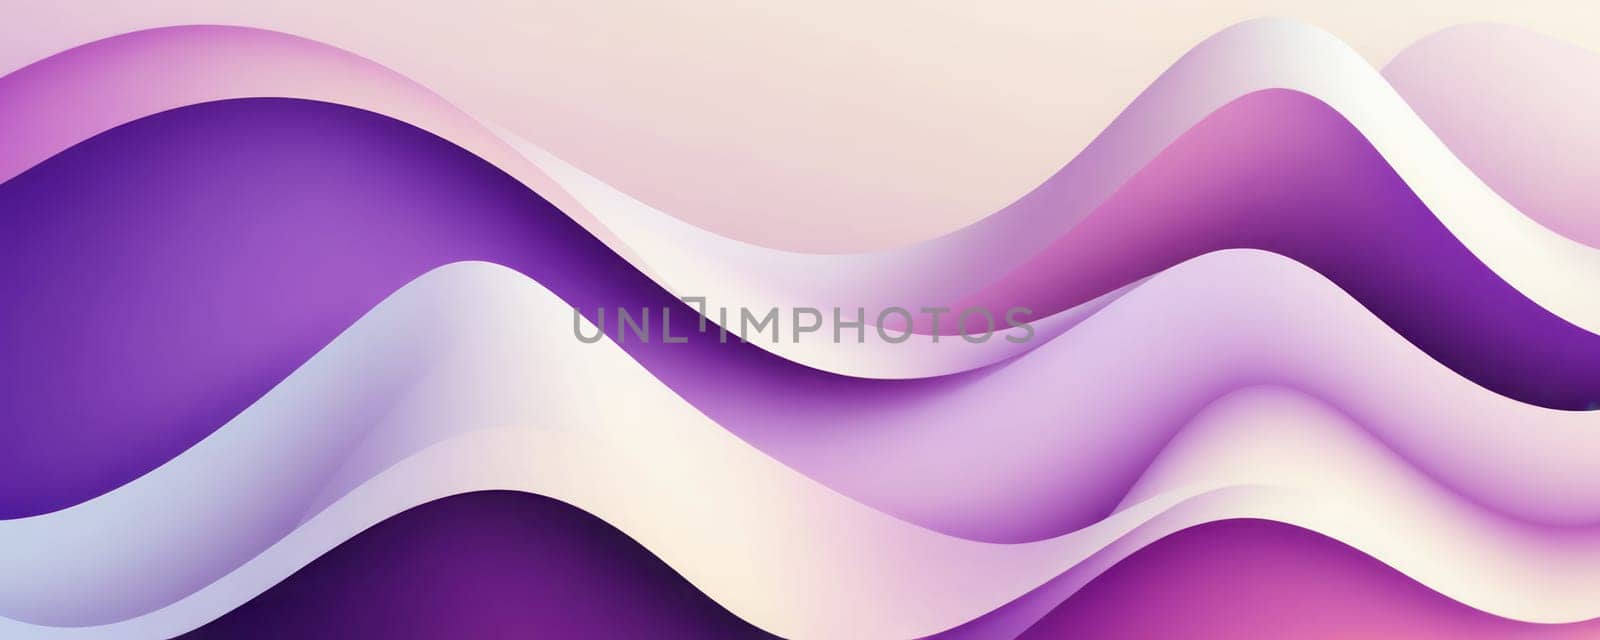 Distorted Shapes in White and Purple by nkotlyar